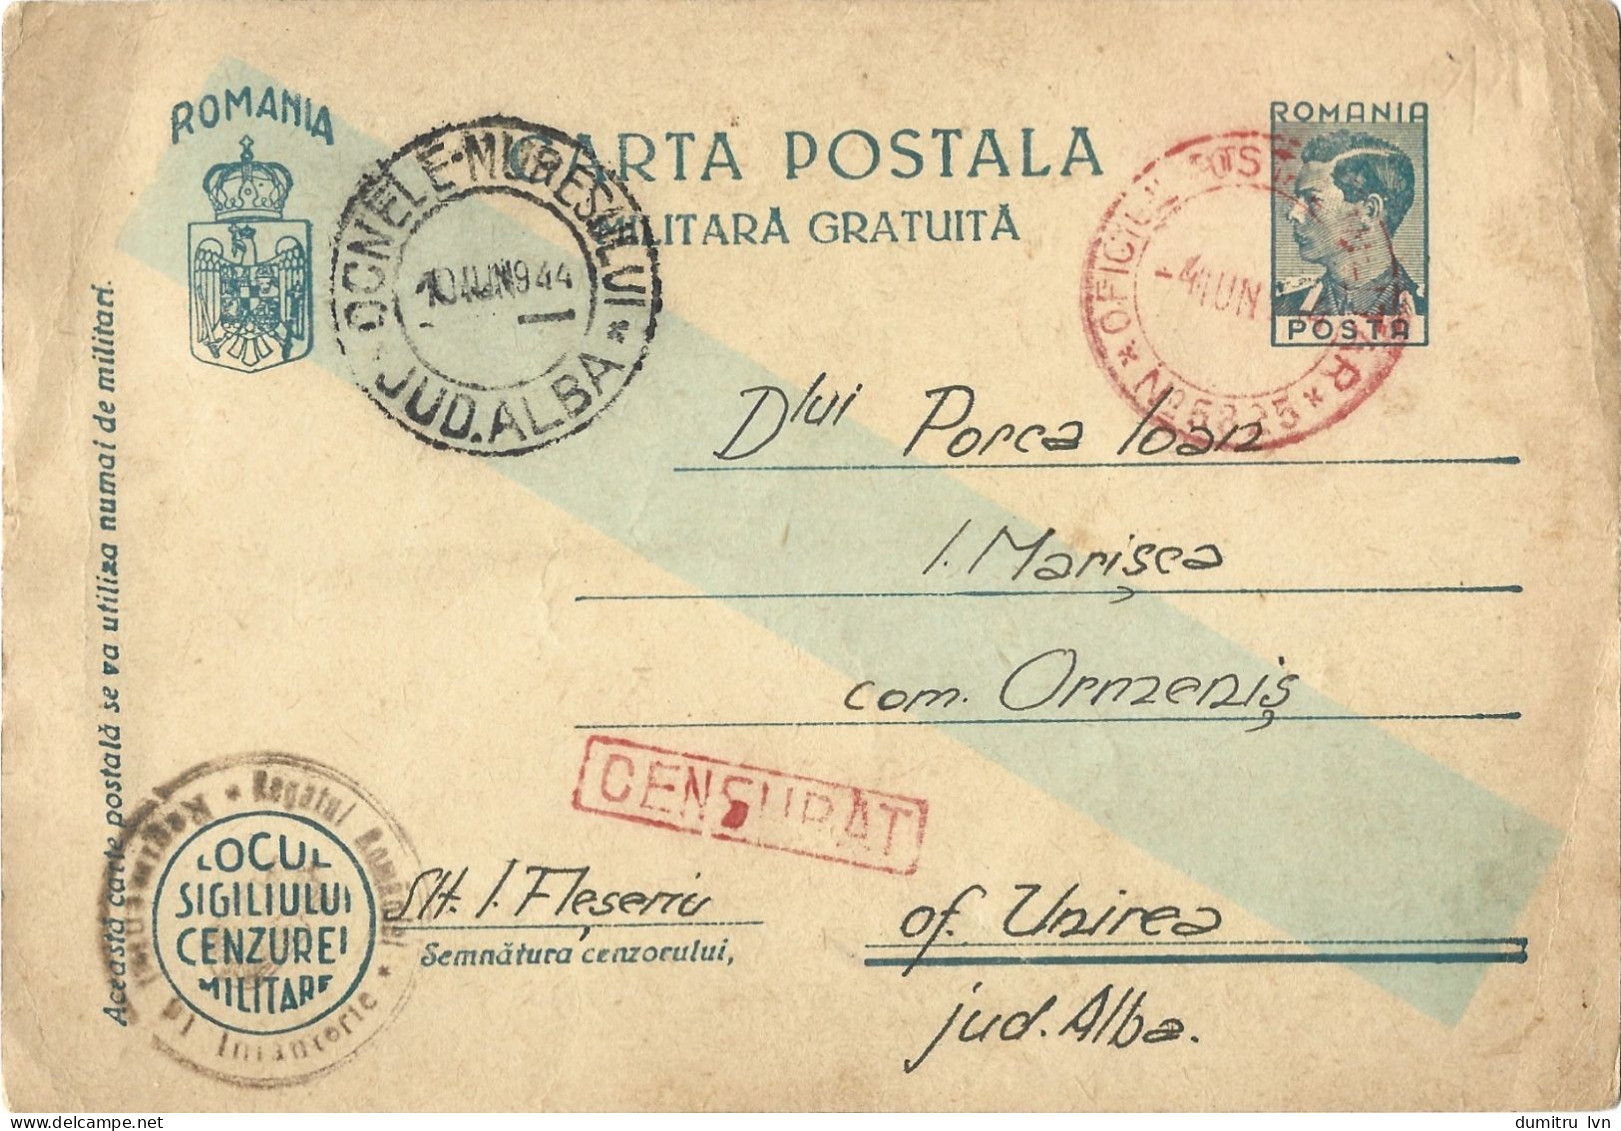 ROMANIA 1944 FREE MILITARY POSTCARD, MILITARY CENSORED, OPM 5825, POSTCARD STATIONERY - World War 2 Letters